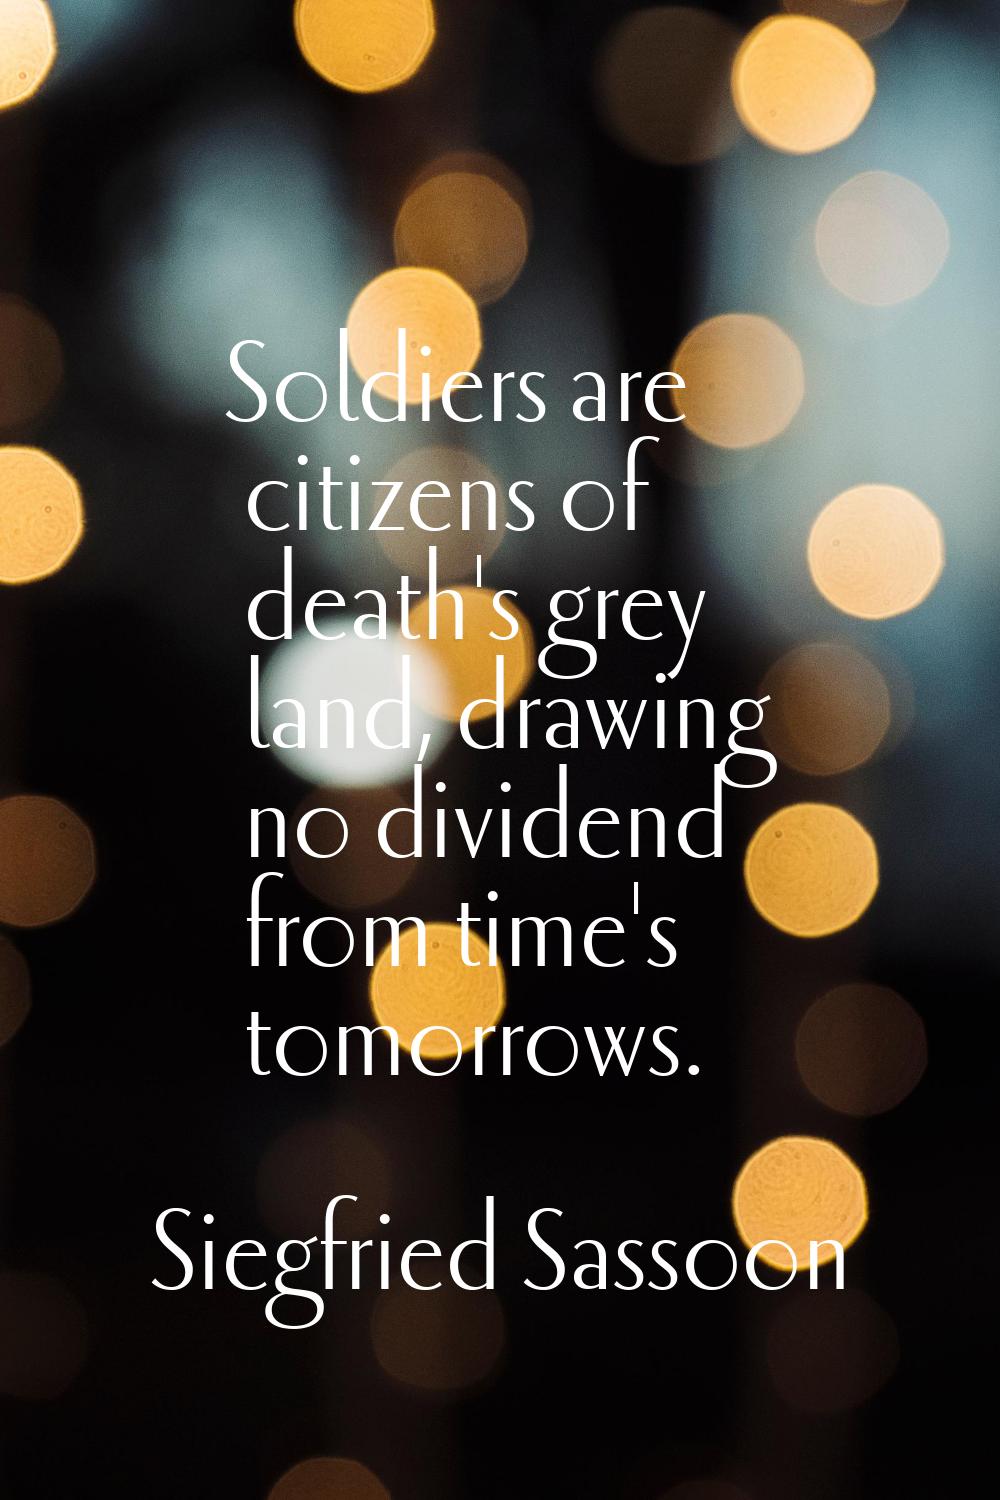 Soldiers are citizens of death's grey land, drawing no dividend from time's tomorrows.